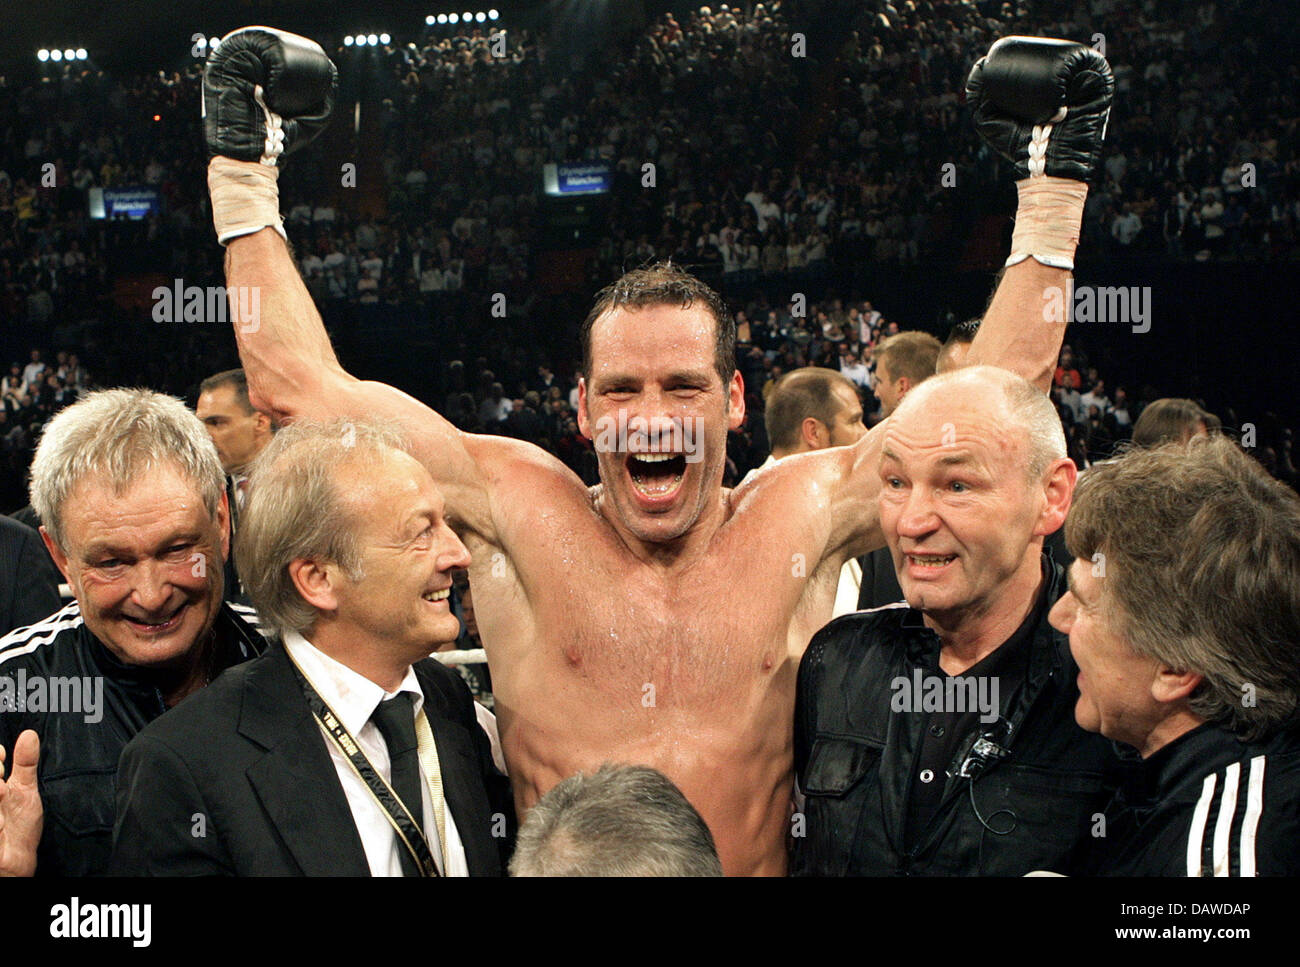 German boxer Maske his victory in the vs Hill fight next to coach Manfred Wolke (R) at the Olympic Hall in Munich, Germany, Saturday, 31 March 2007. Maske won